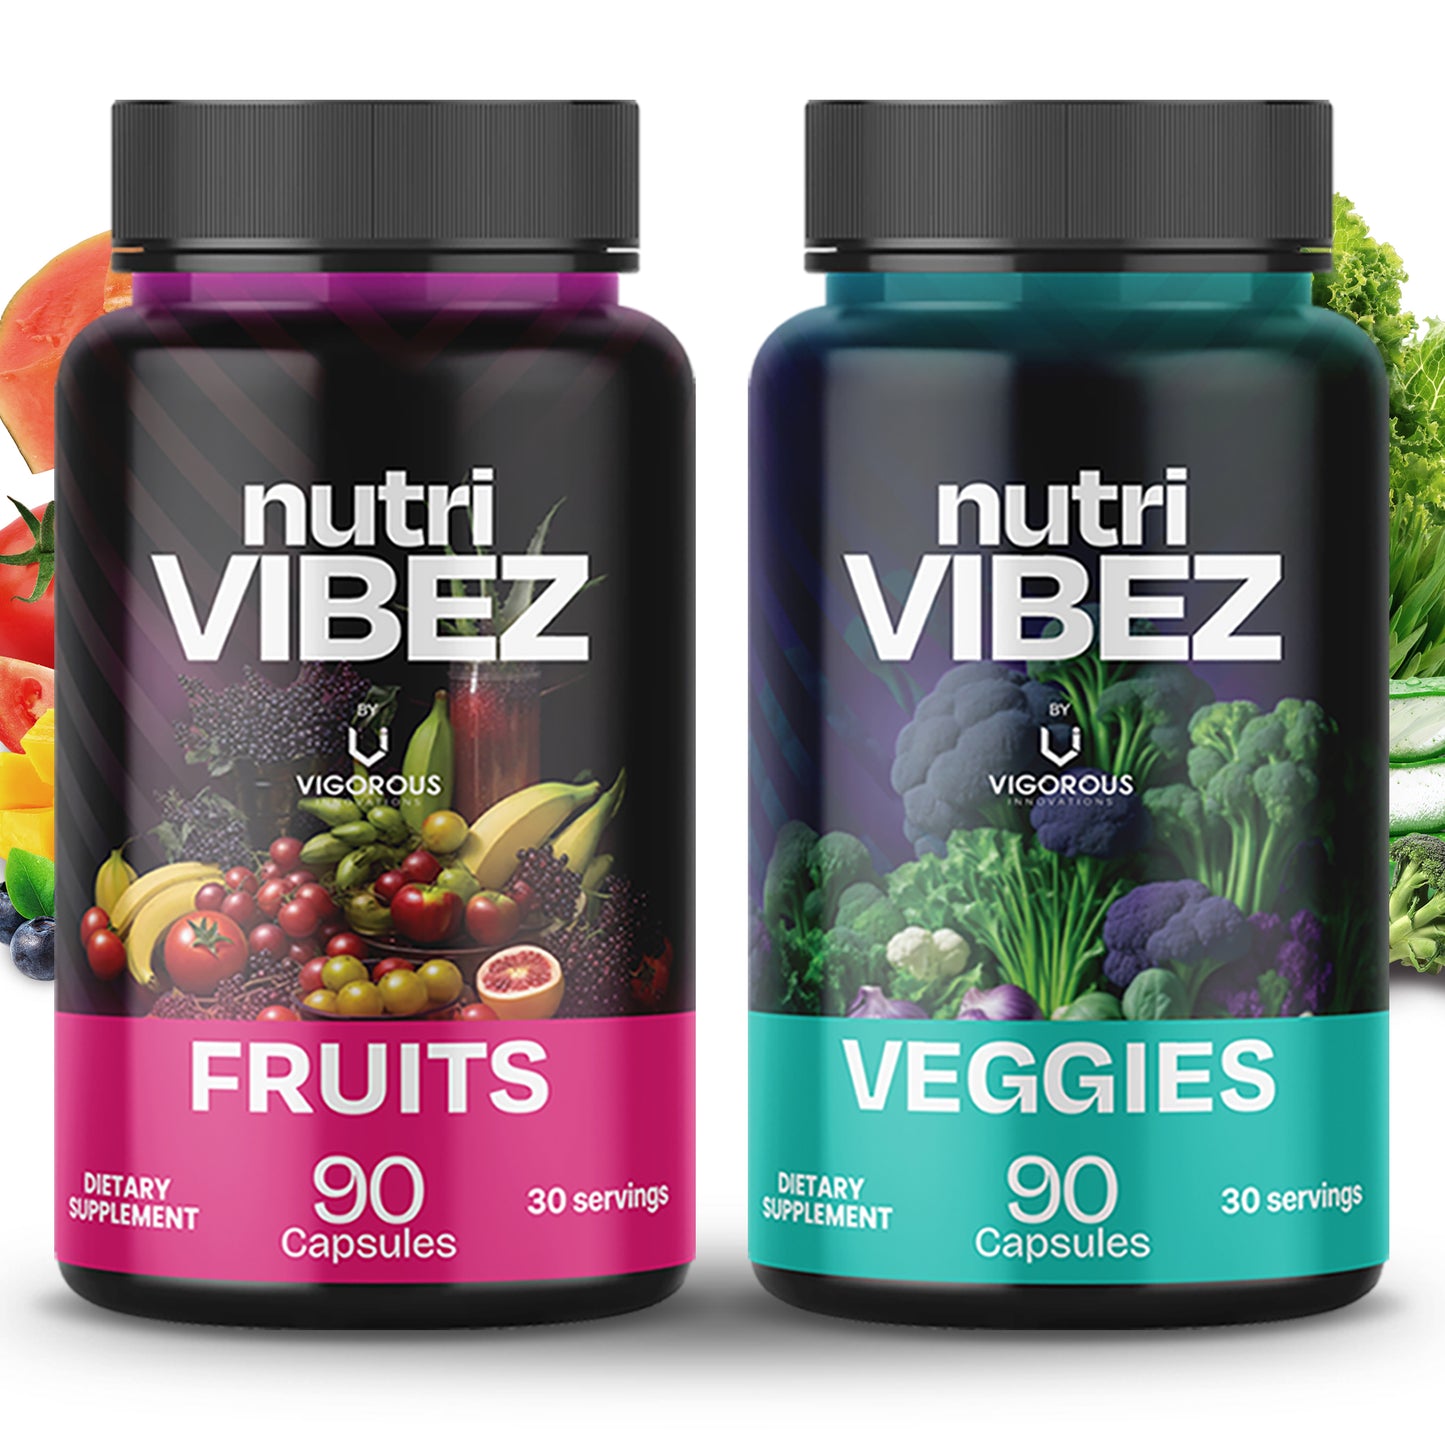 Nutri Vibez Fruits and Veggies Supplement - Whole Produce Fruit and Vegetable Supplement